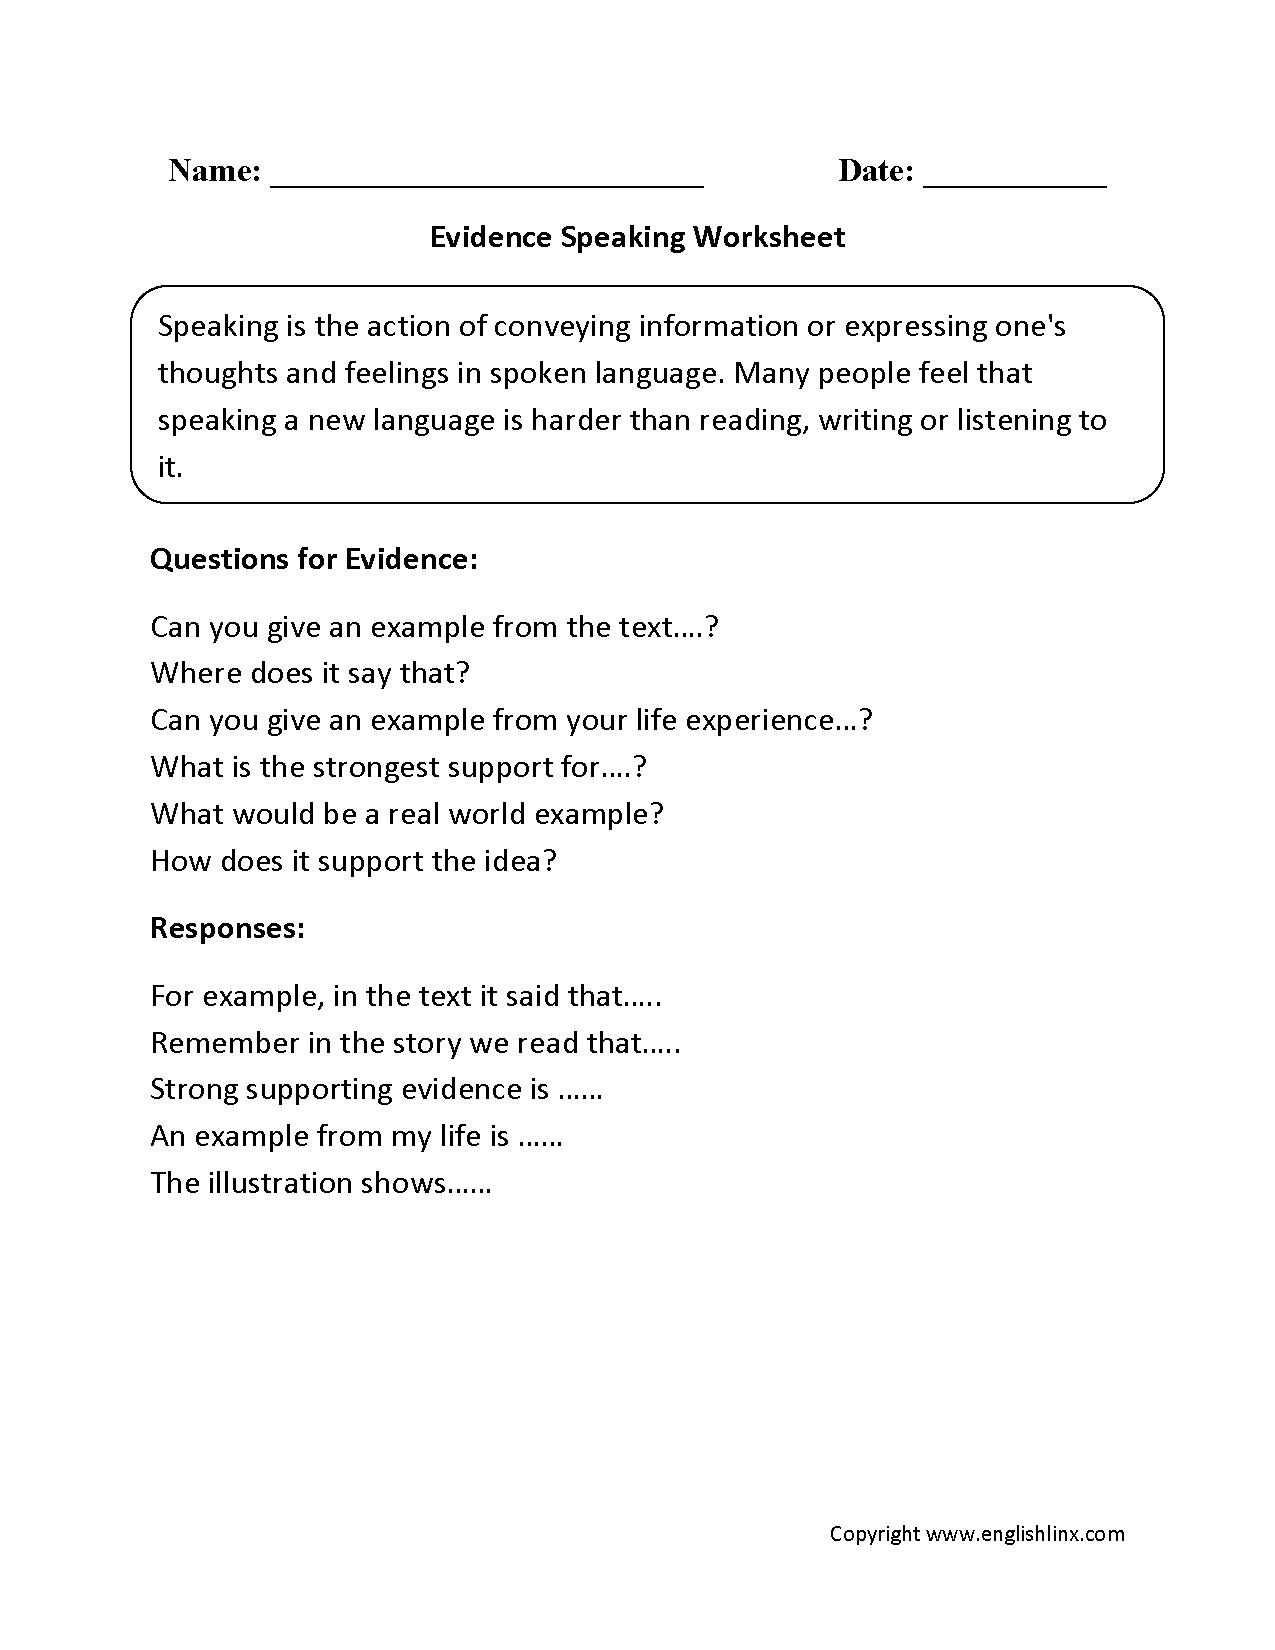 English Speaking Worksheets Pdf With Answers